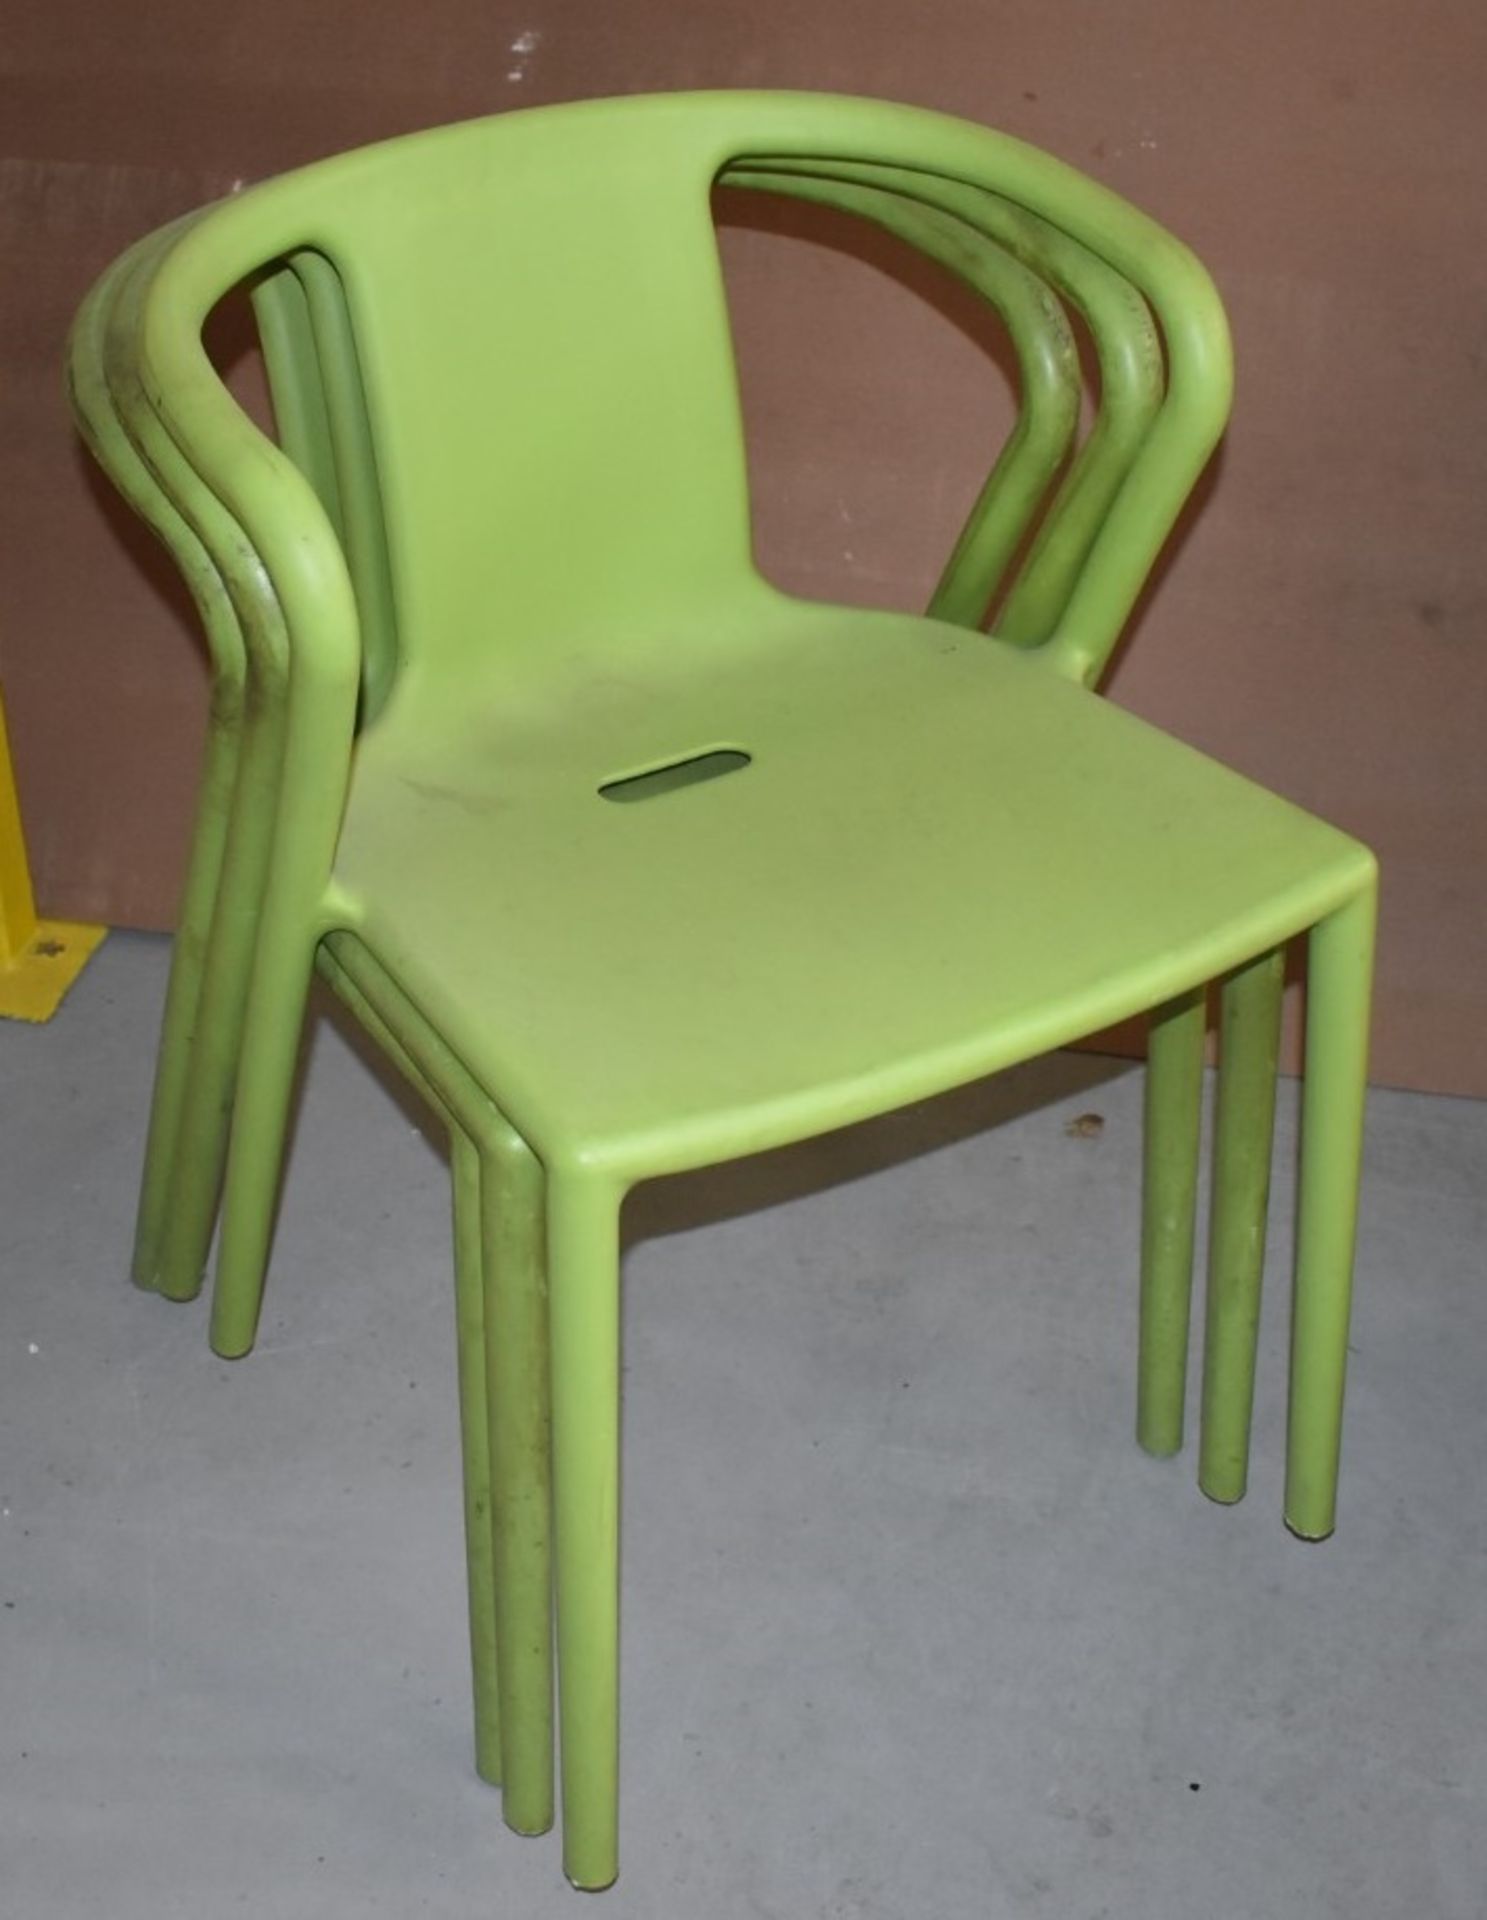 3 x Contemporary Outdoor Garden Chairs in Green - Ref WH - CL530 - Location: Leicestershire, LE12